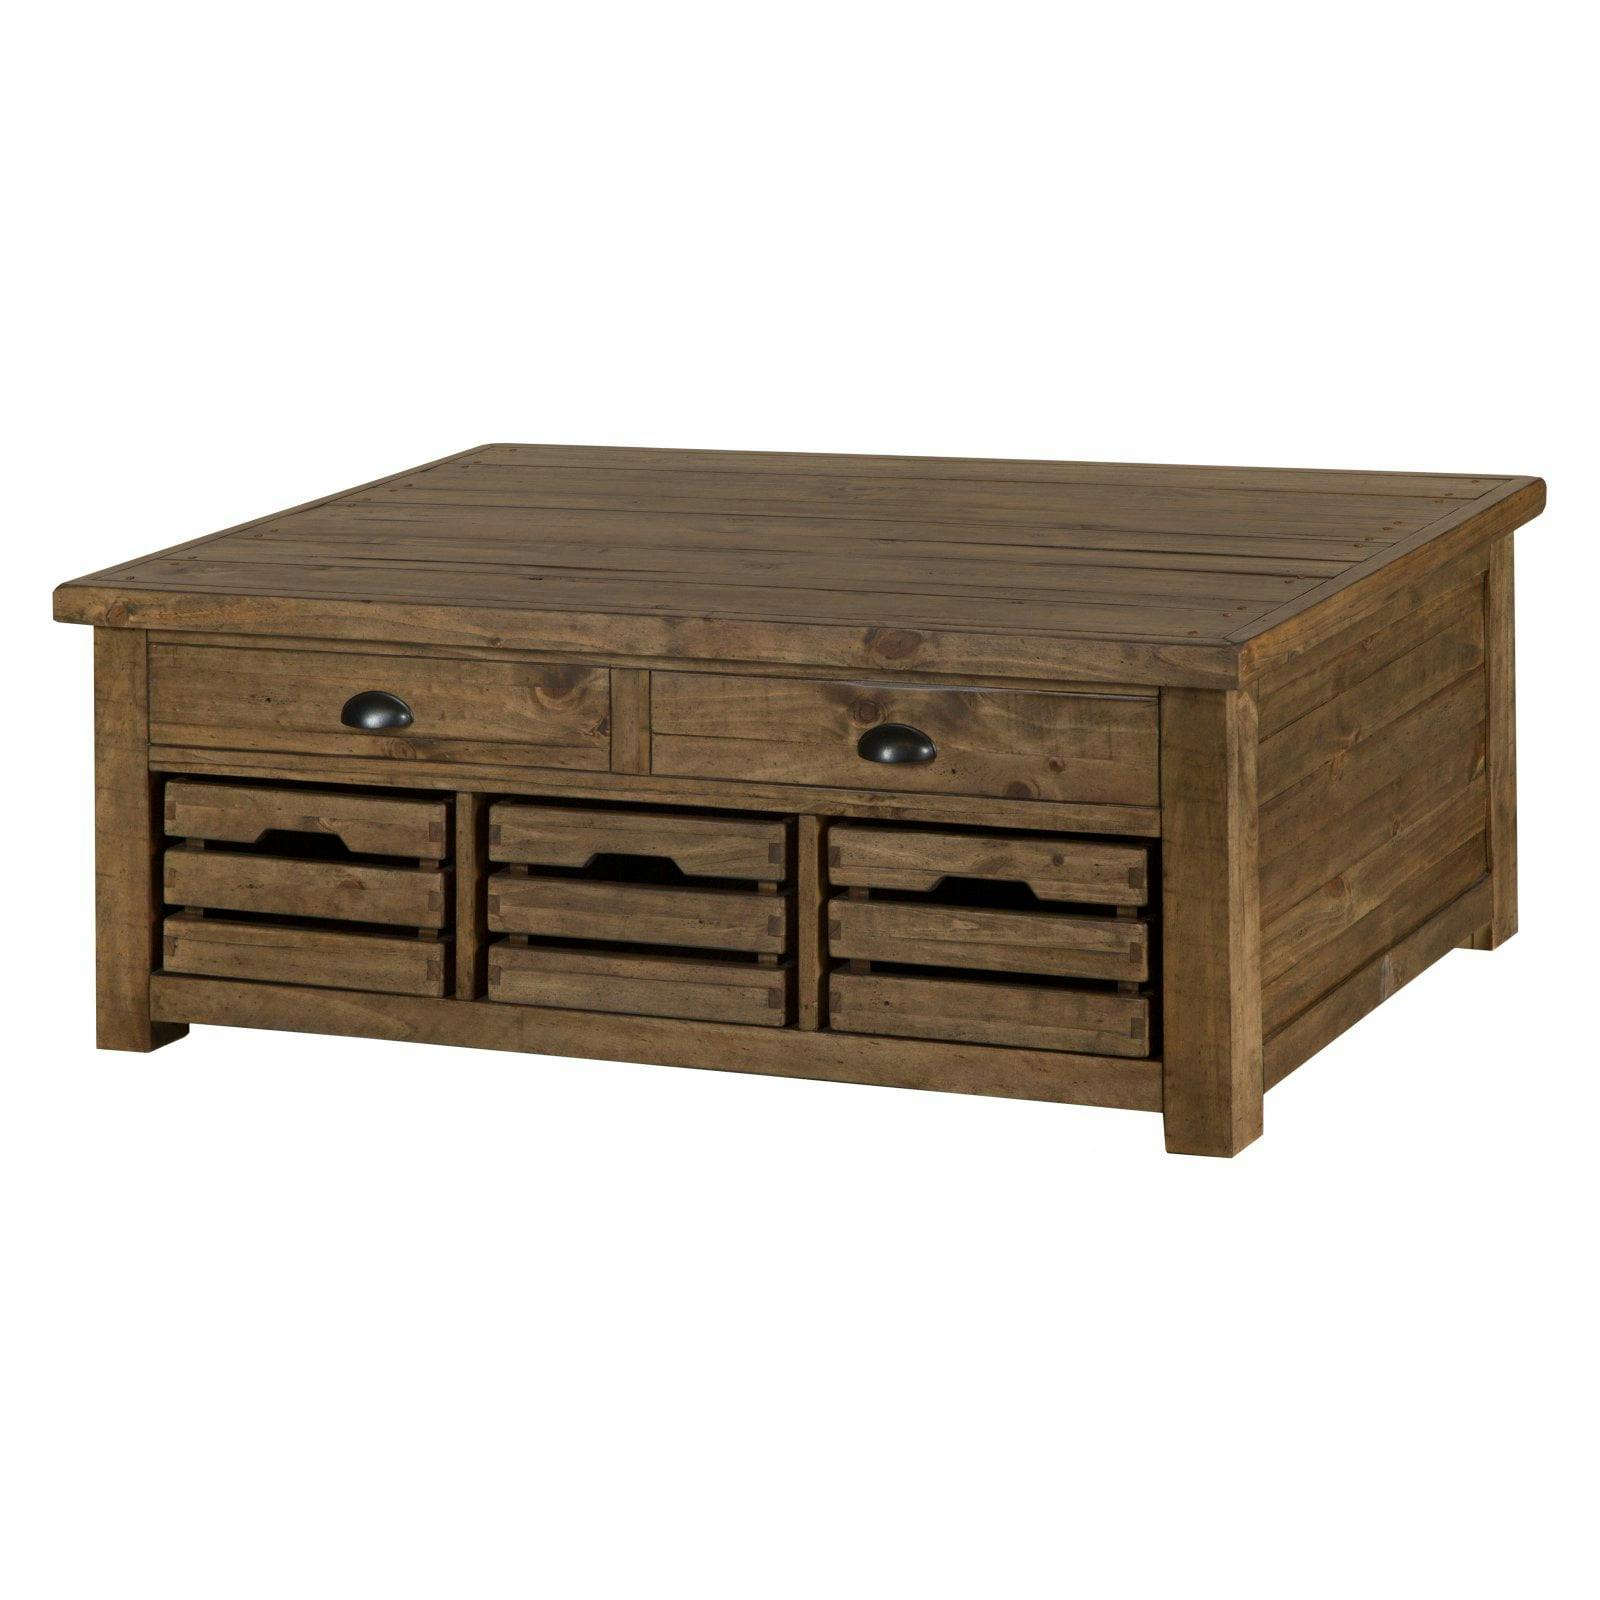 Transitional Warm Nutmeg Pine Lift-Top Coffee Table with Storage